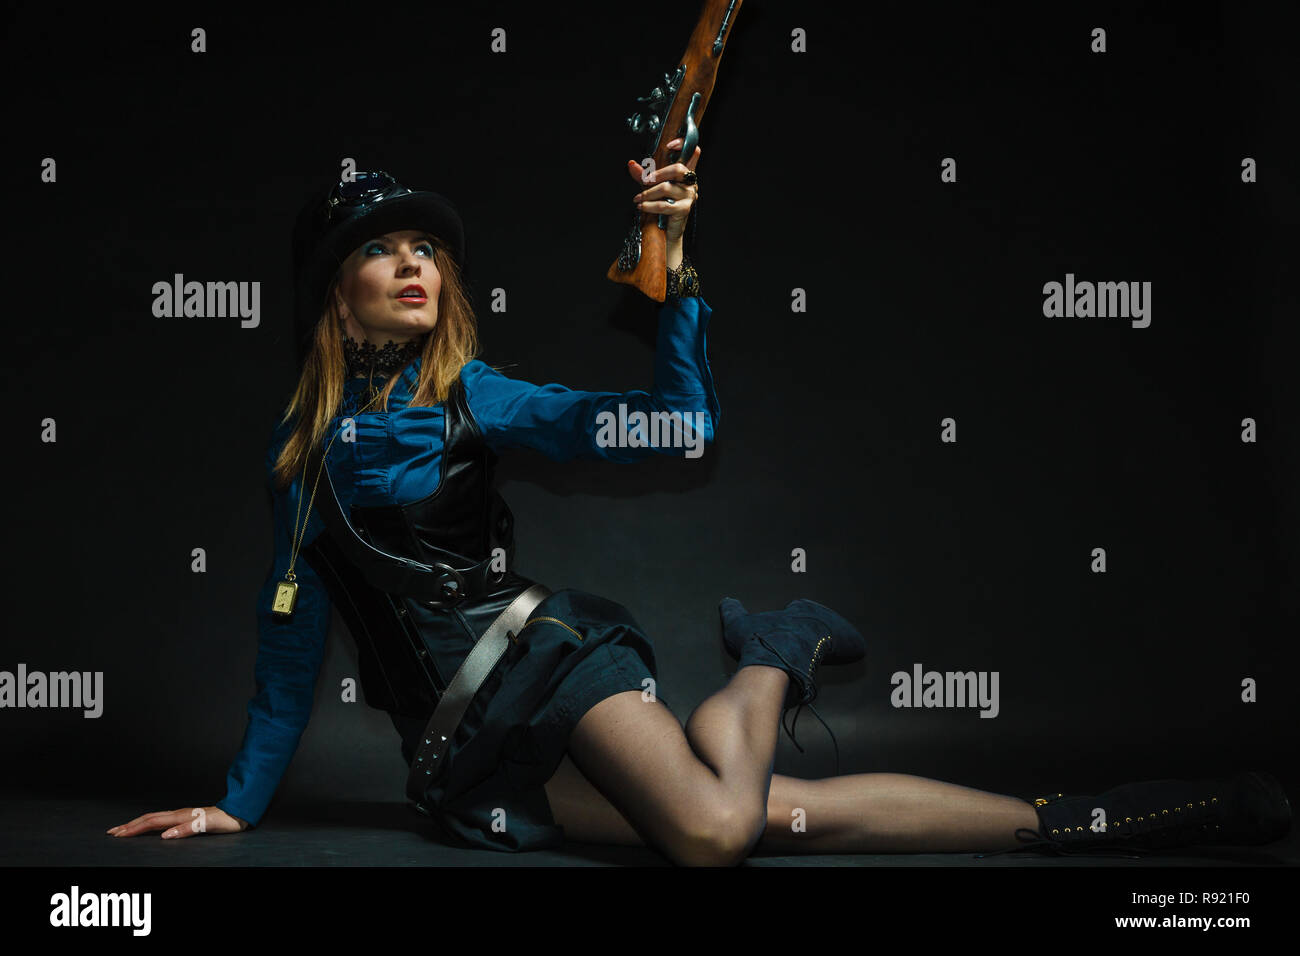 Subculture fashionable victorian elegant weapon concept. Steampunk girl armed and dangerous. Lady dressed in victorian fashion holding antique firearm Stock Photo